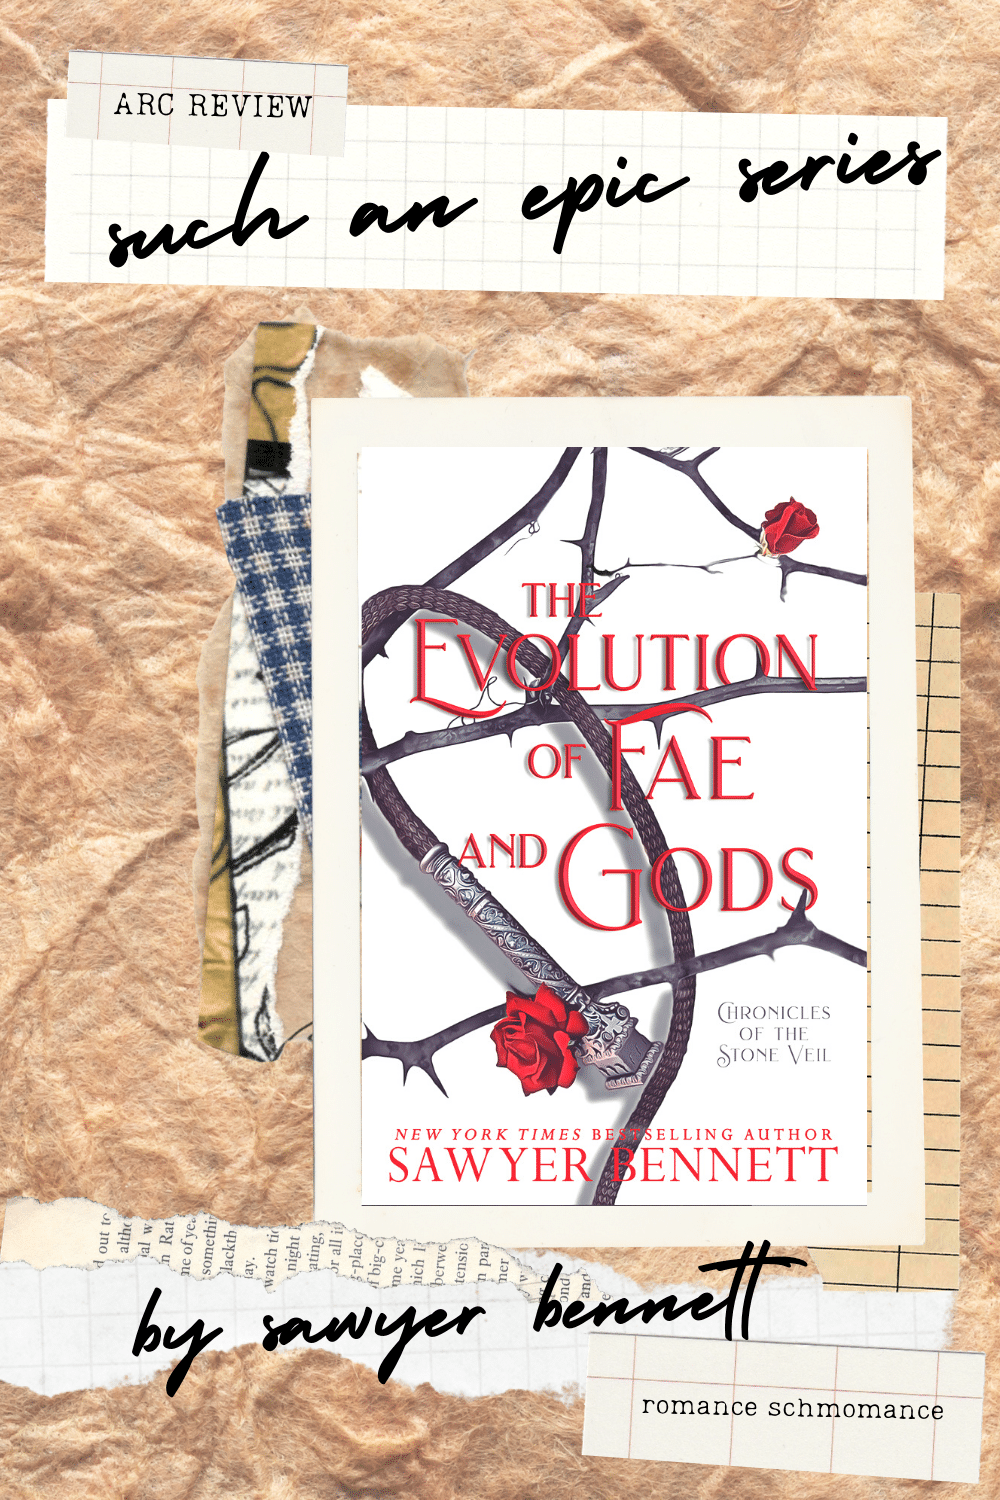 Romance Schmomance | Book Review : The Evolution of Fae and Gods by Sawyer Bennett